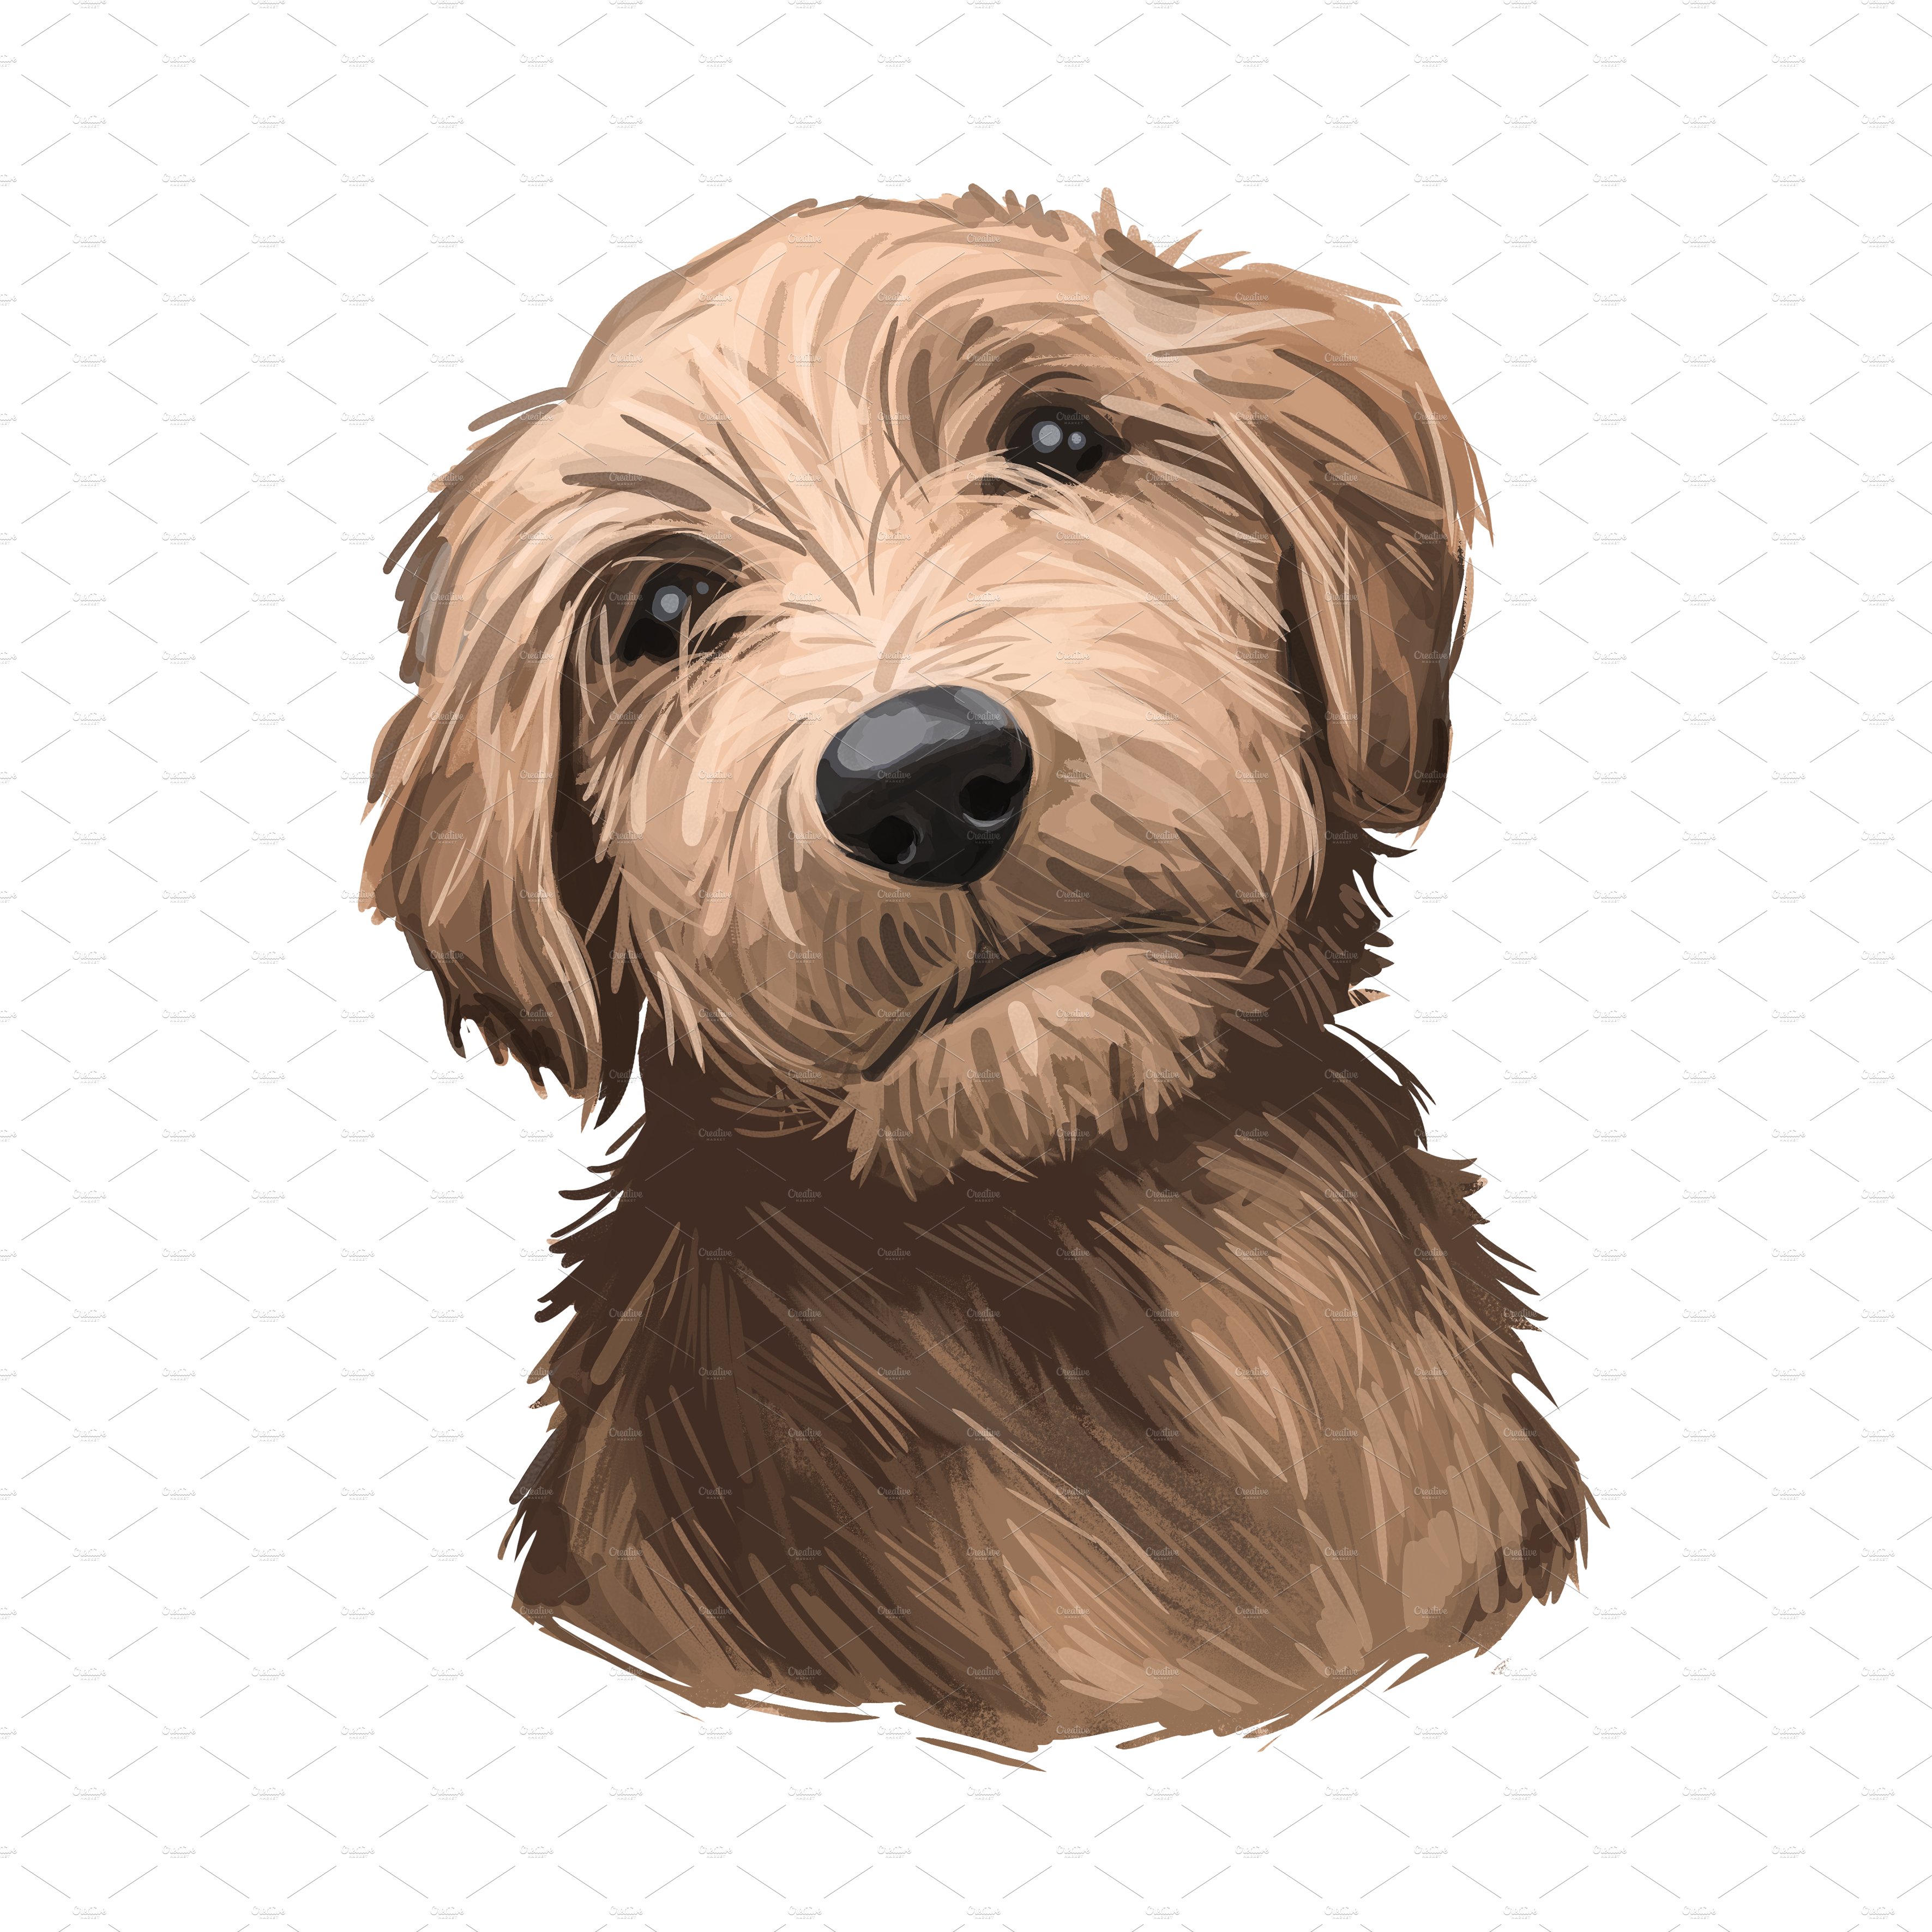 5. goldendoodle puppy tan 28229 979